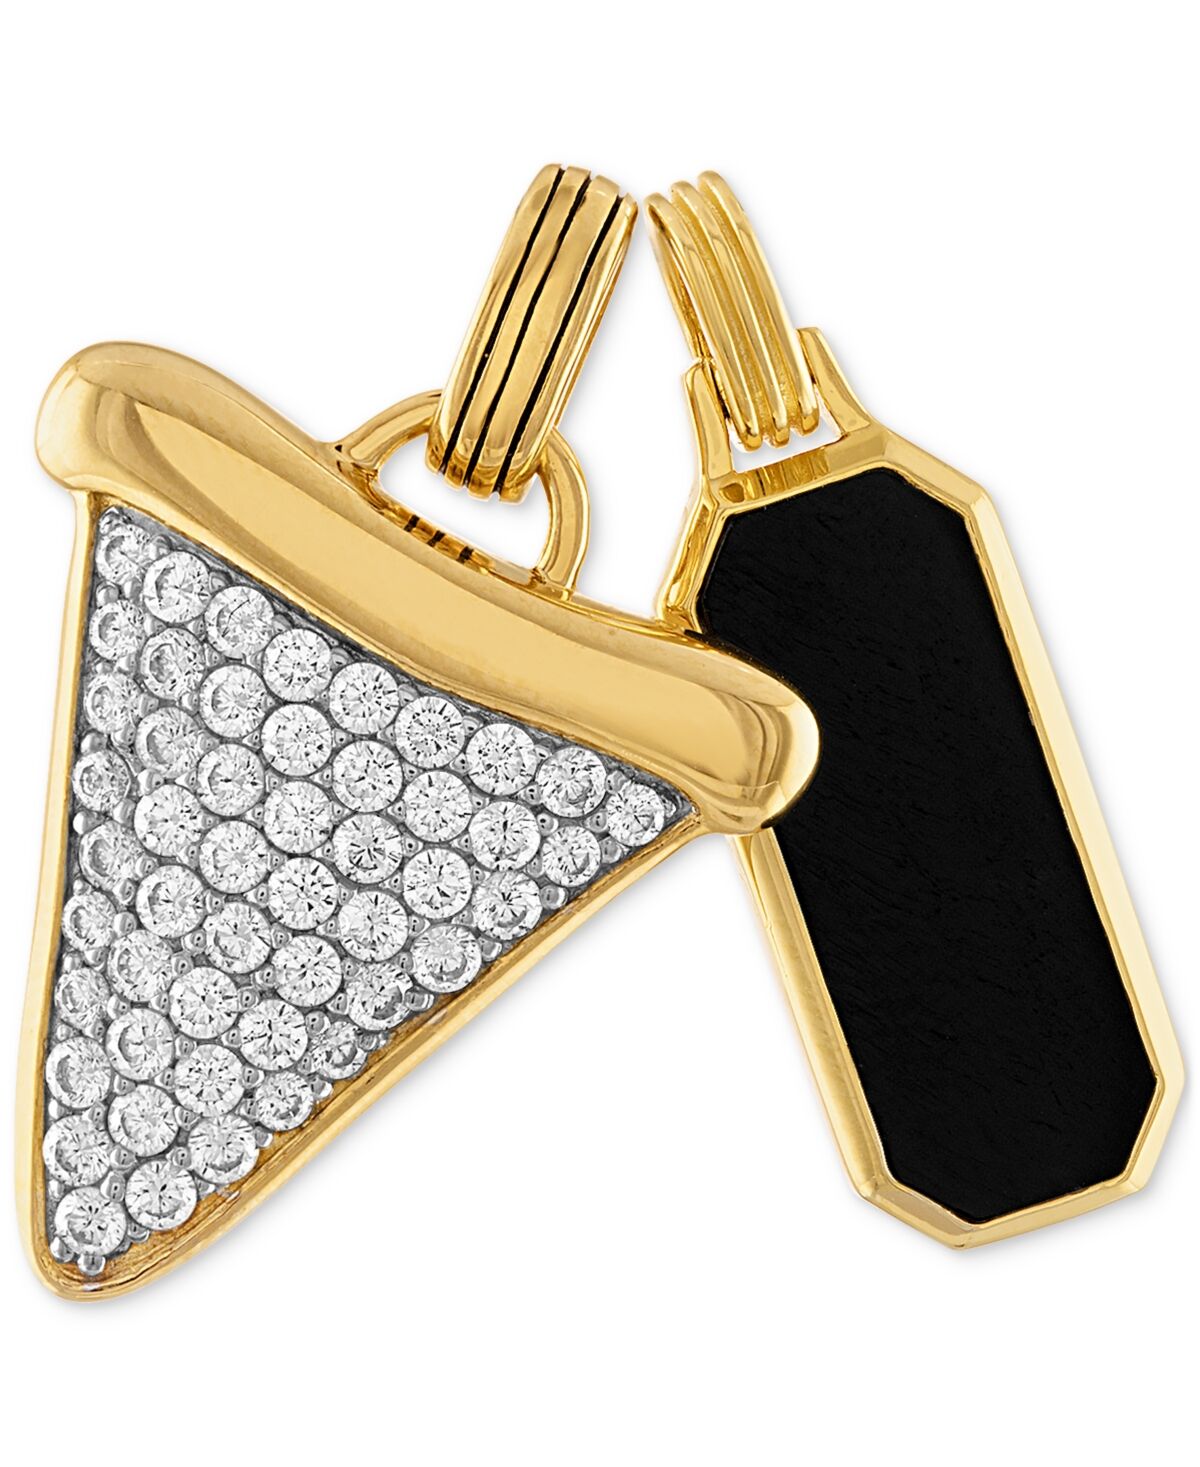 Esquire Men's Jewelry 2-Pc. Set Onyx Dog Tag & Cubic Zirconia Pave Shark Tooth Amulet Pendants in 14k Gold-Plated Sterling Silver, Created for Macy's